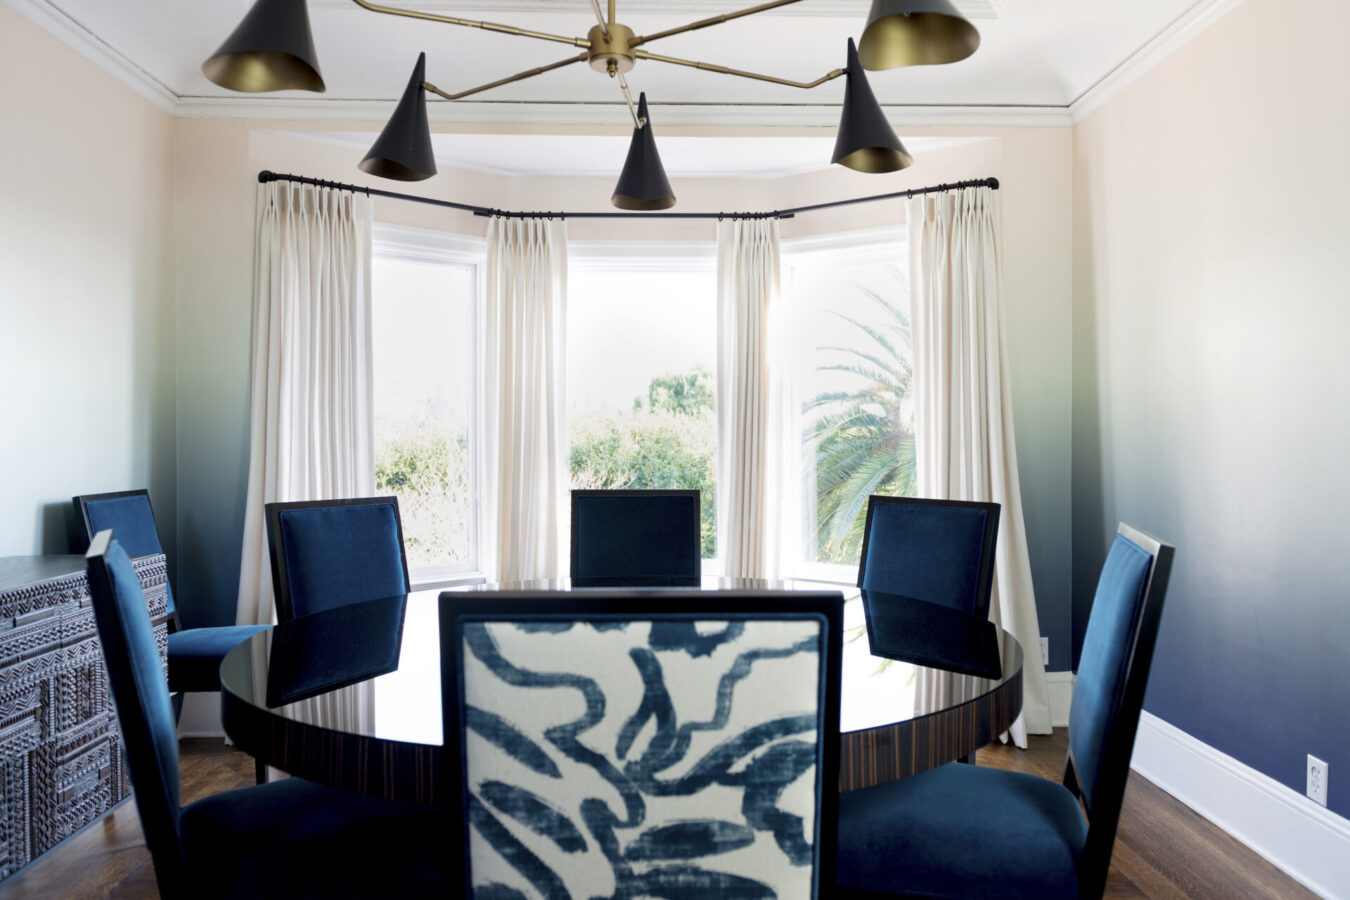 Interior design featuring blue dining chairs and gold lighting features by Kelly Finley black owned interior design firm